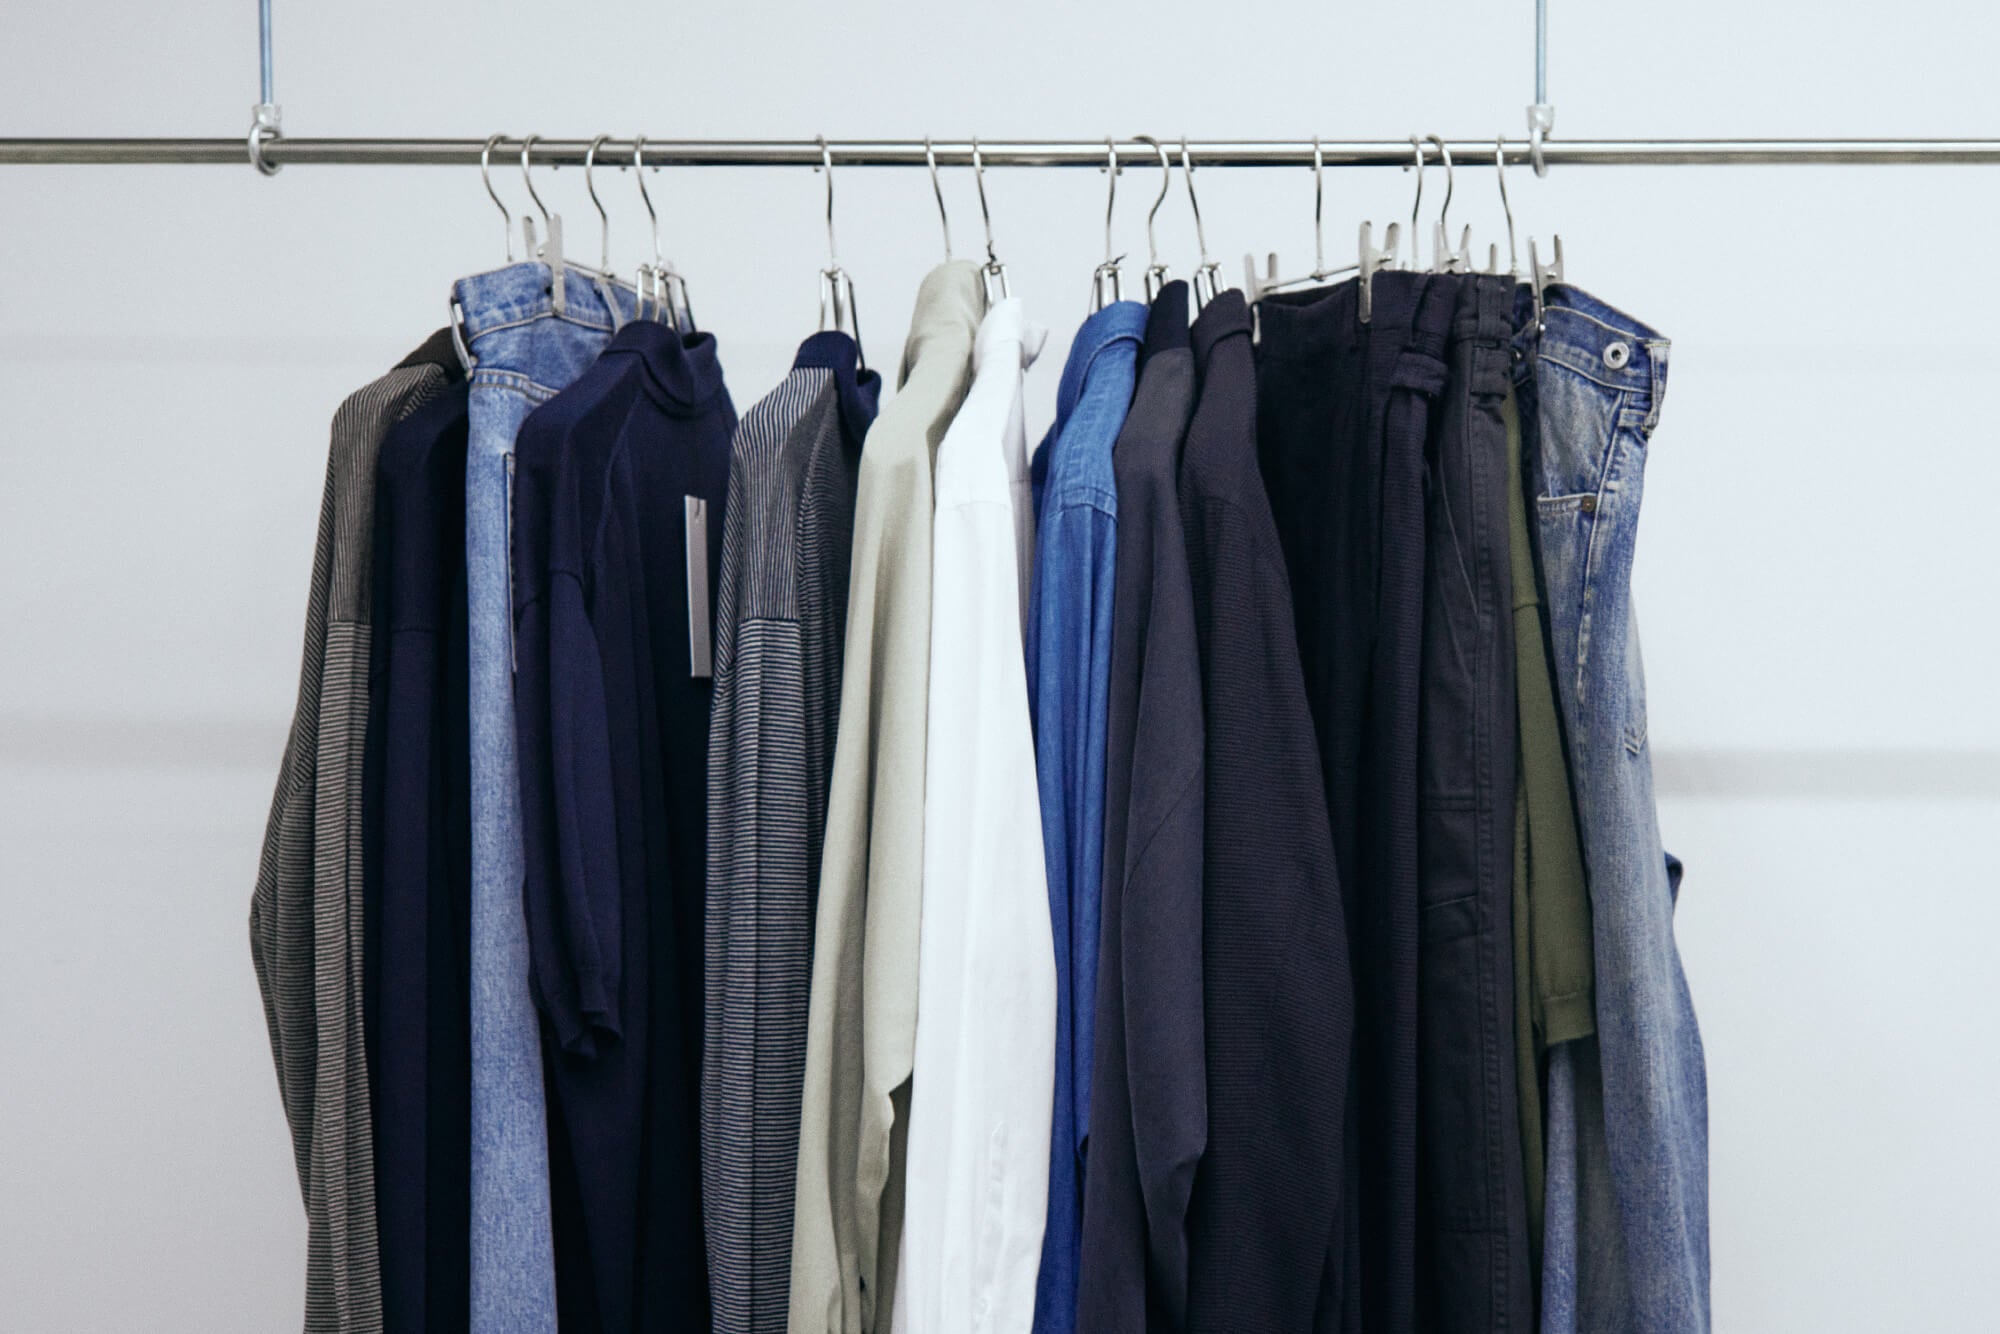 The Clothes you really need. A.PRESSE